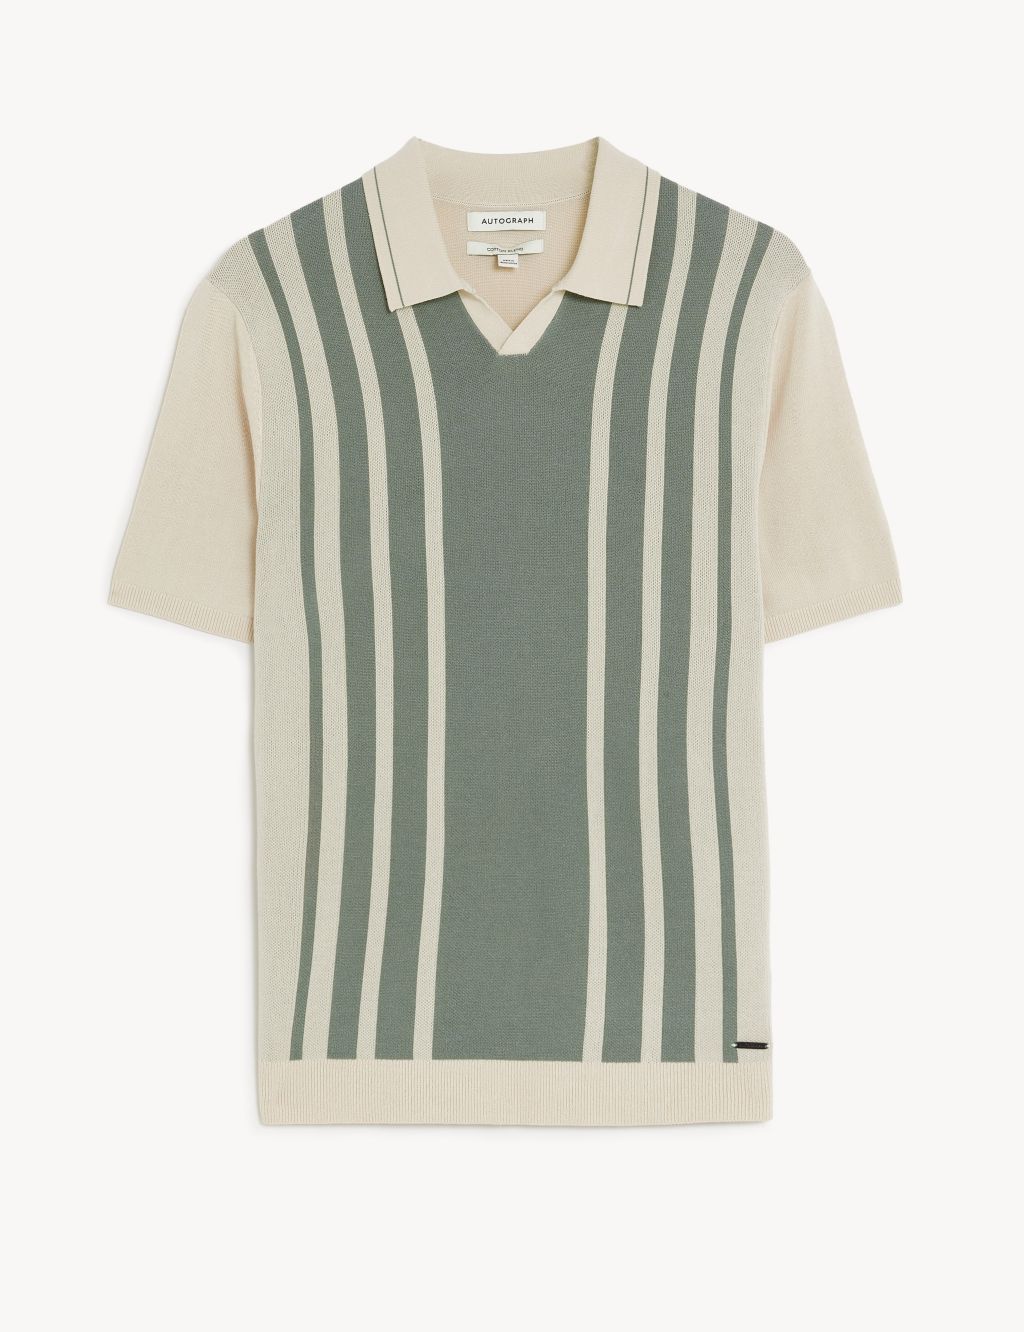 Cotton Blend Striped Knitted Polo Shirt image 2